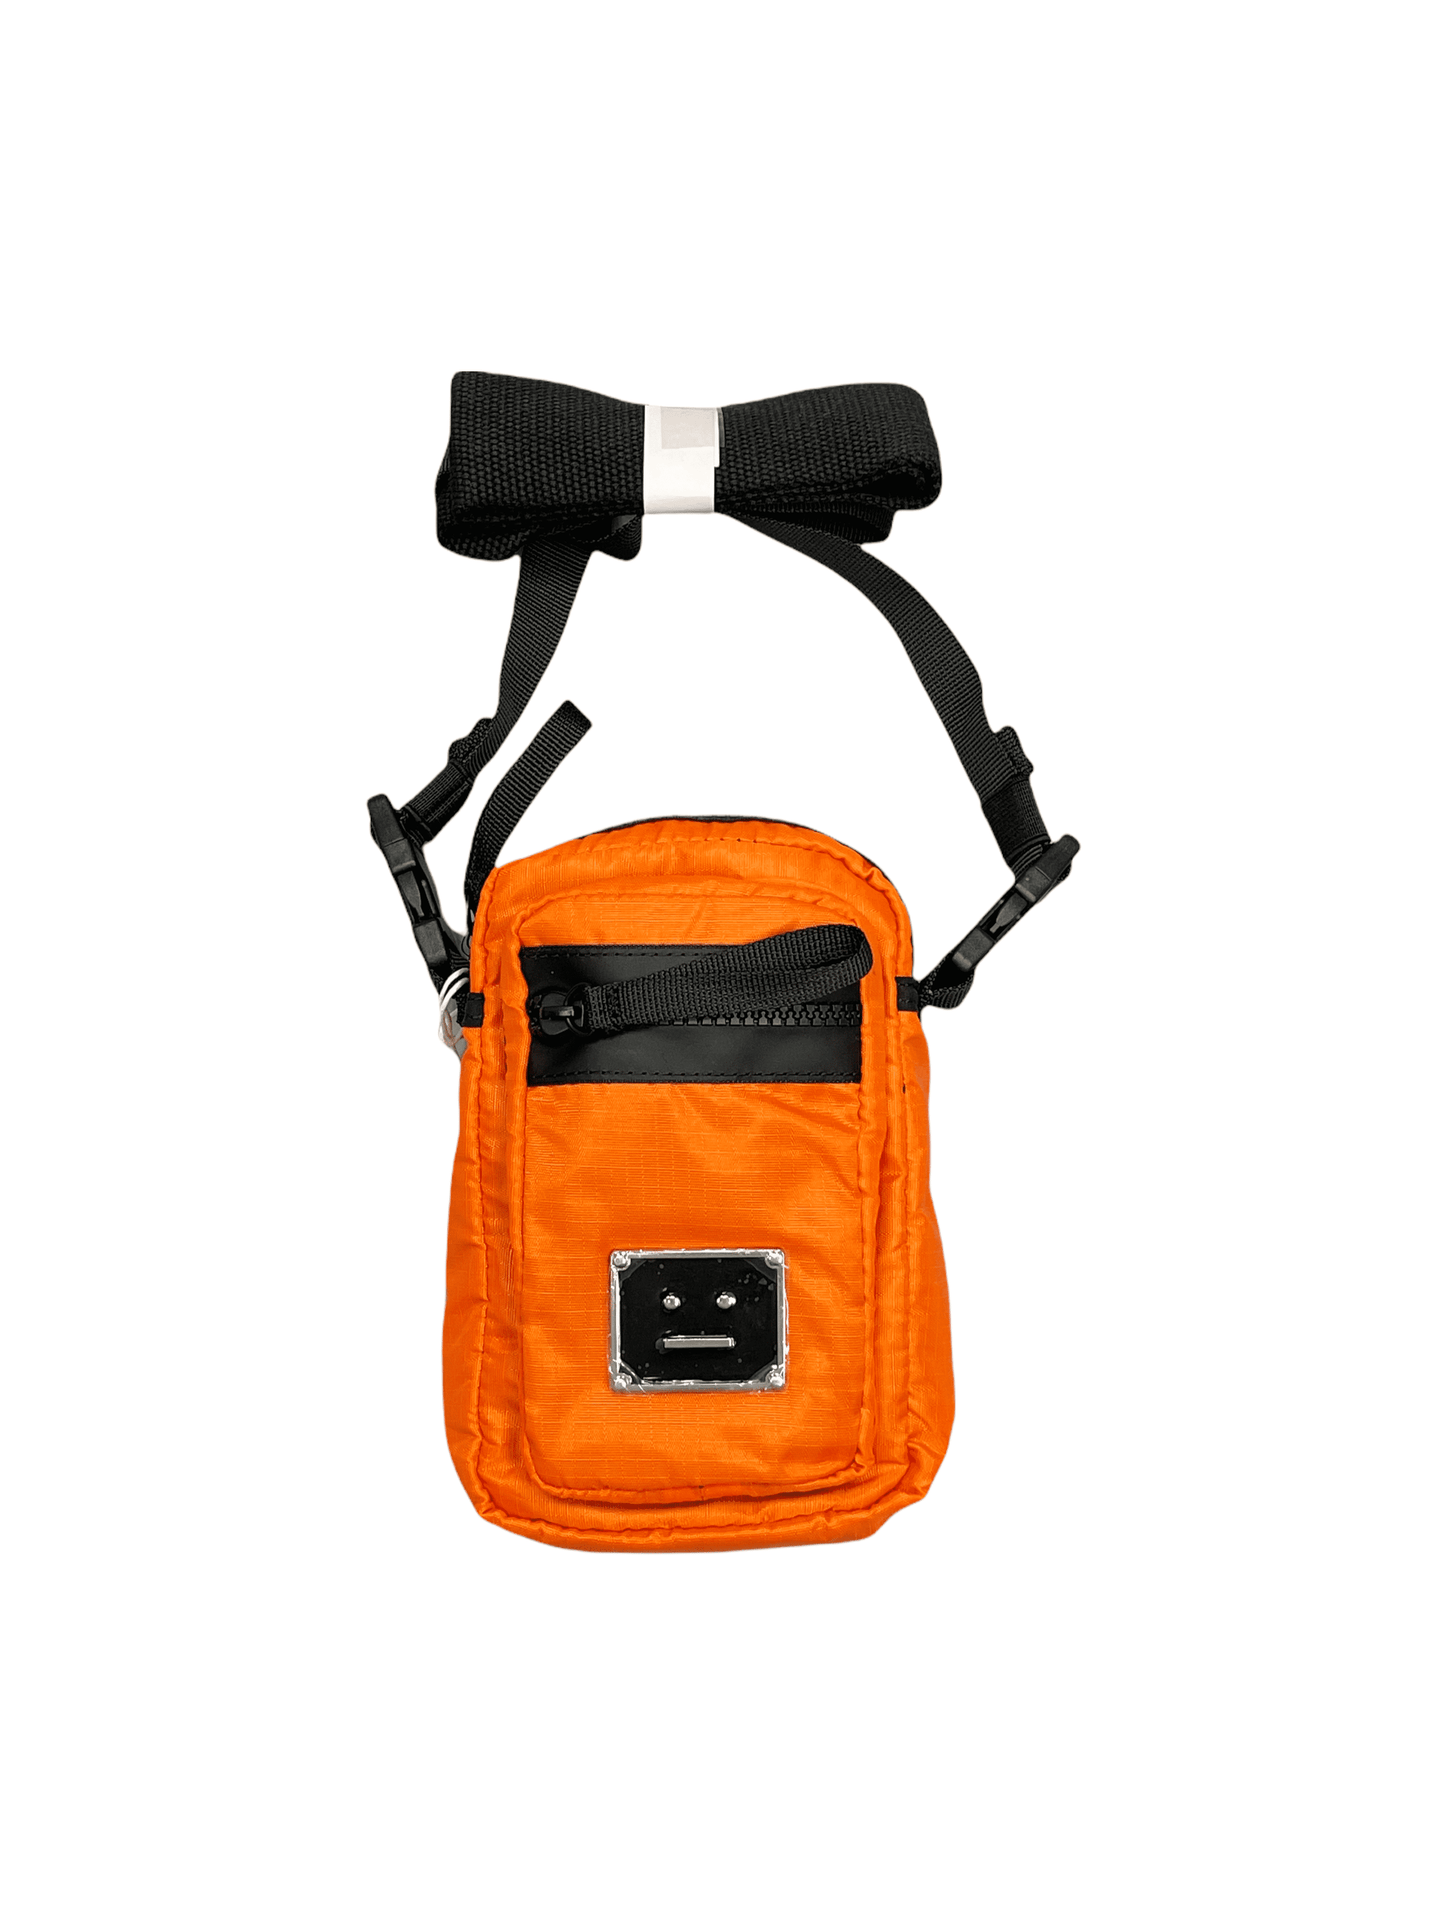 Acne Studios Orange Nylon Cross Body Sling Bag - Genuine Design Luxury Consignment for Men. New & Pre-Owned Clothing, Shoes, & Accessories. Calgary, Canada